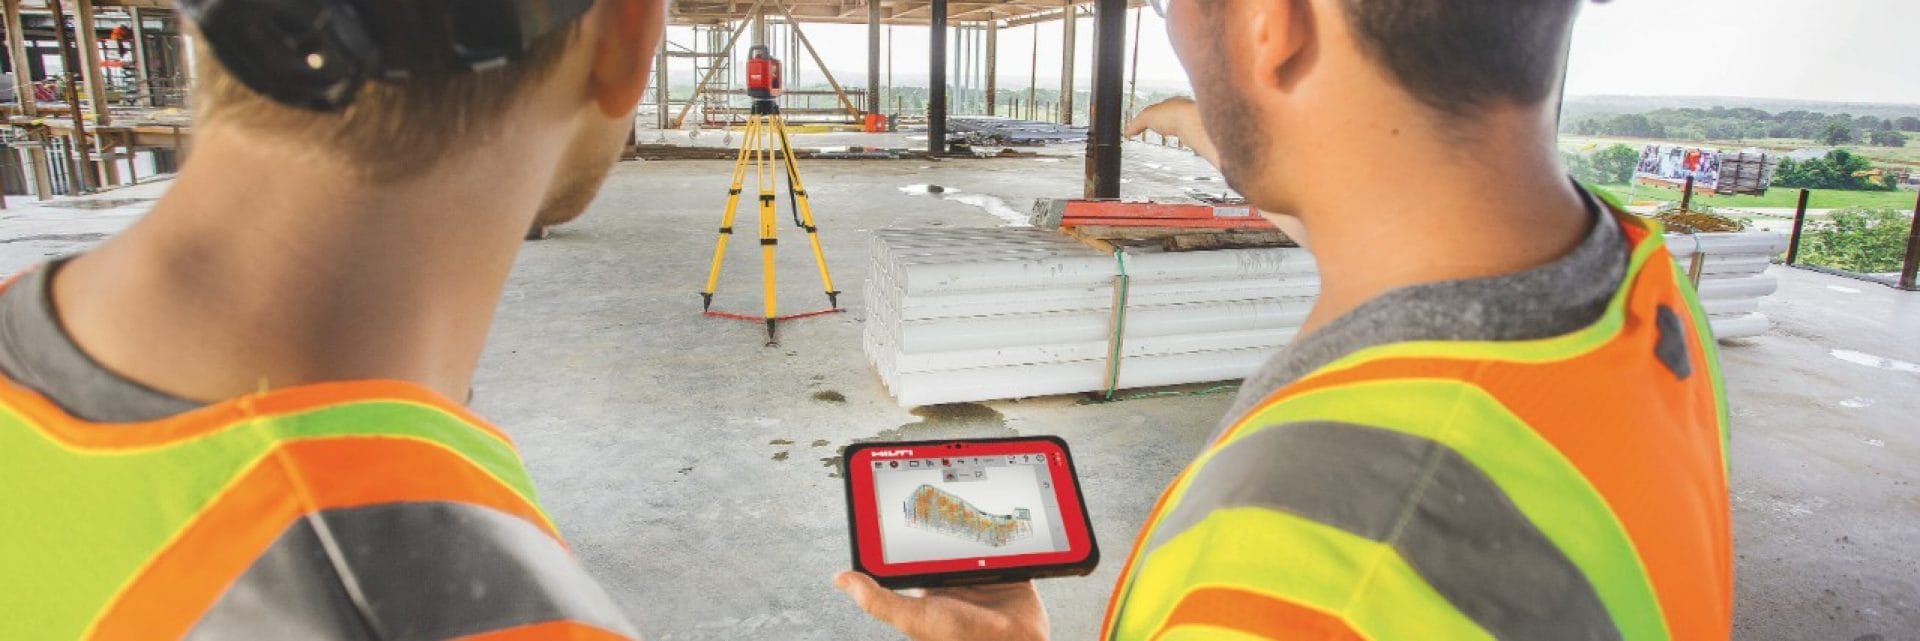 Hilti advanced layout solution in use at the jobsite